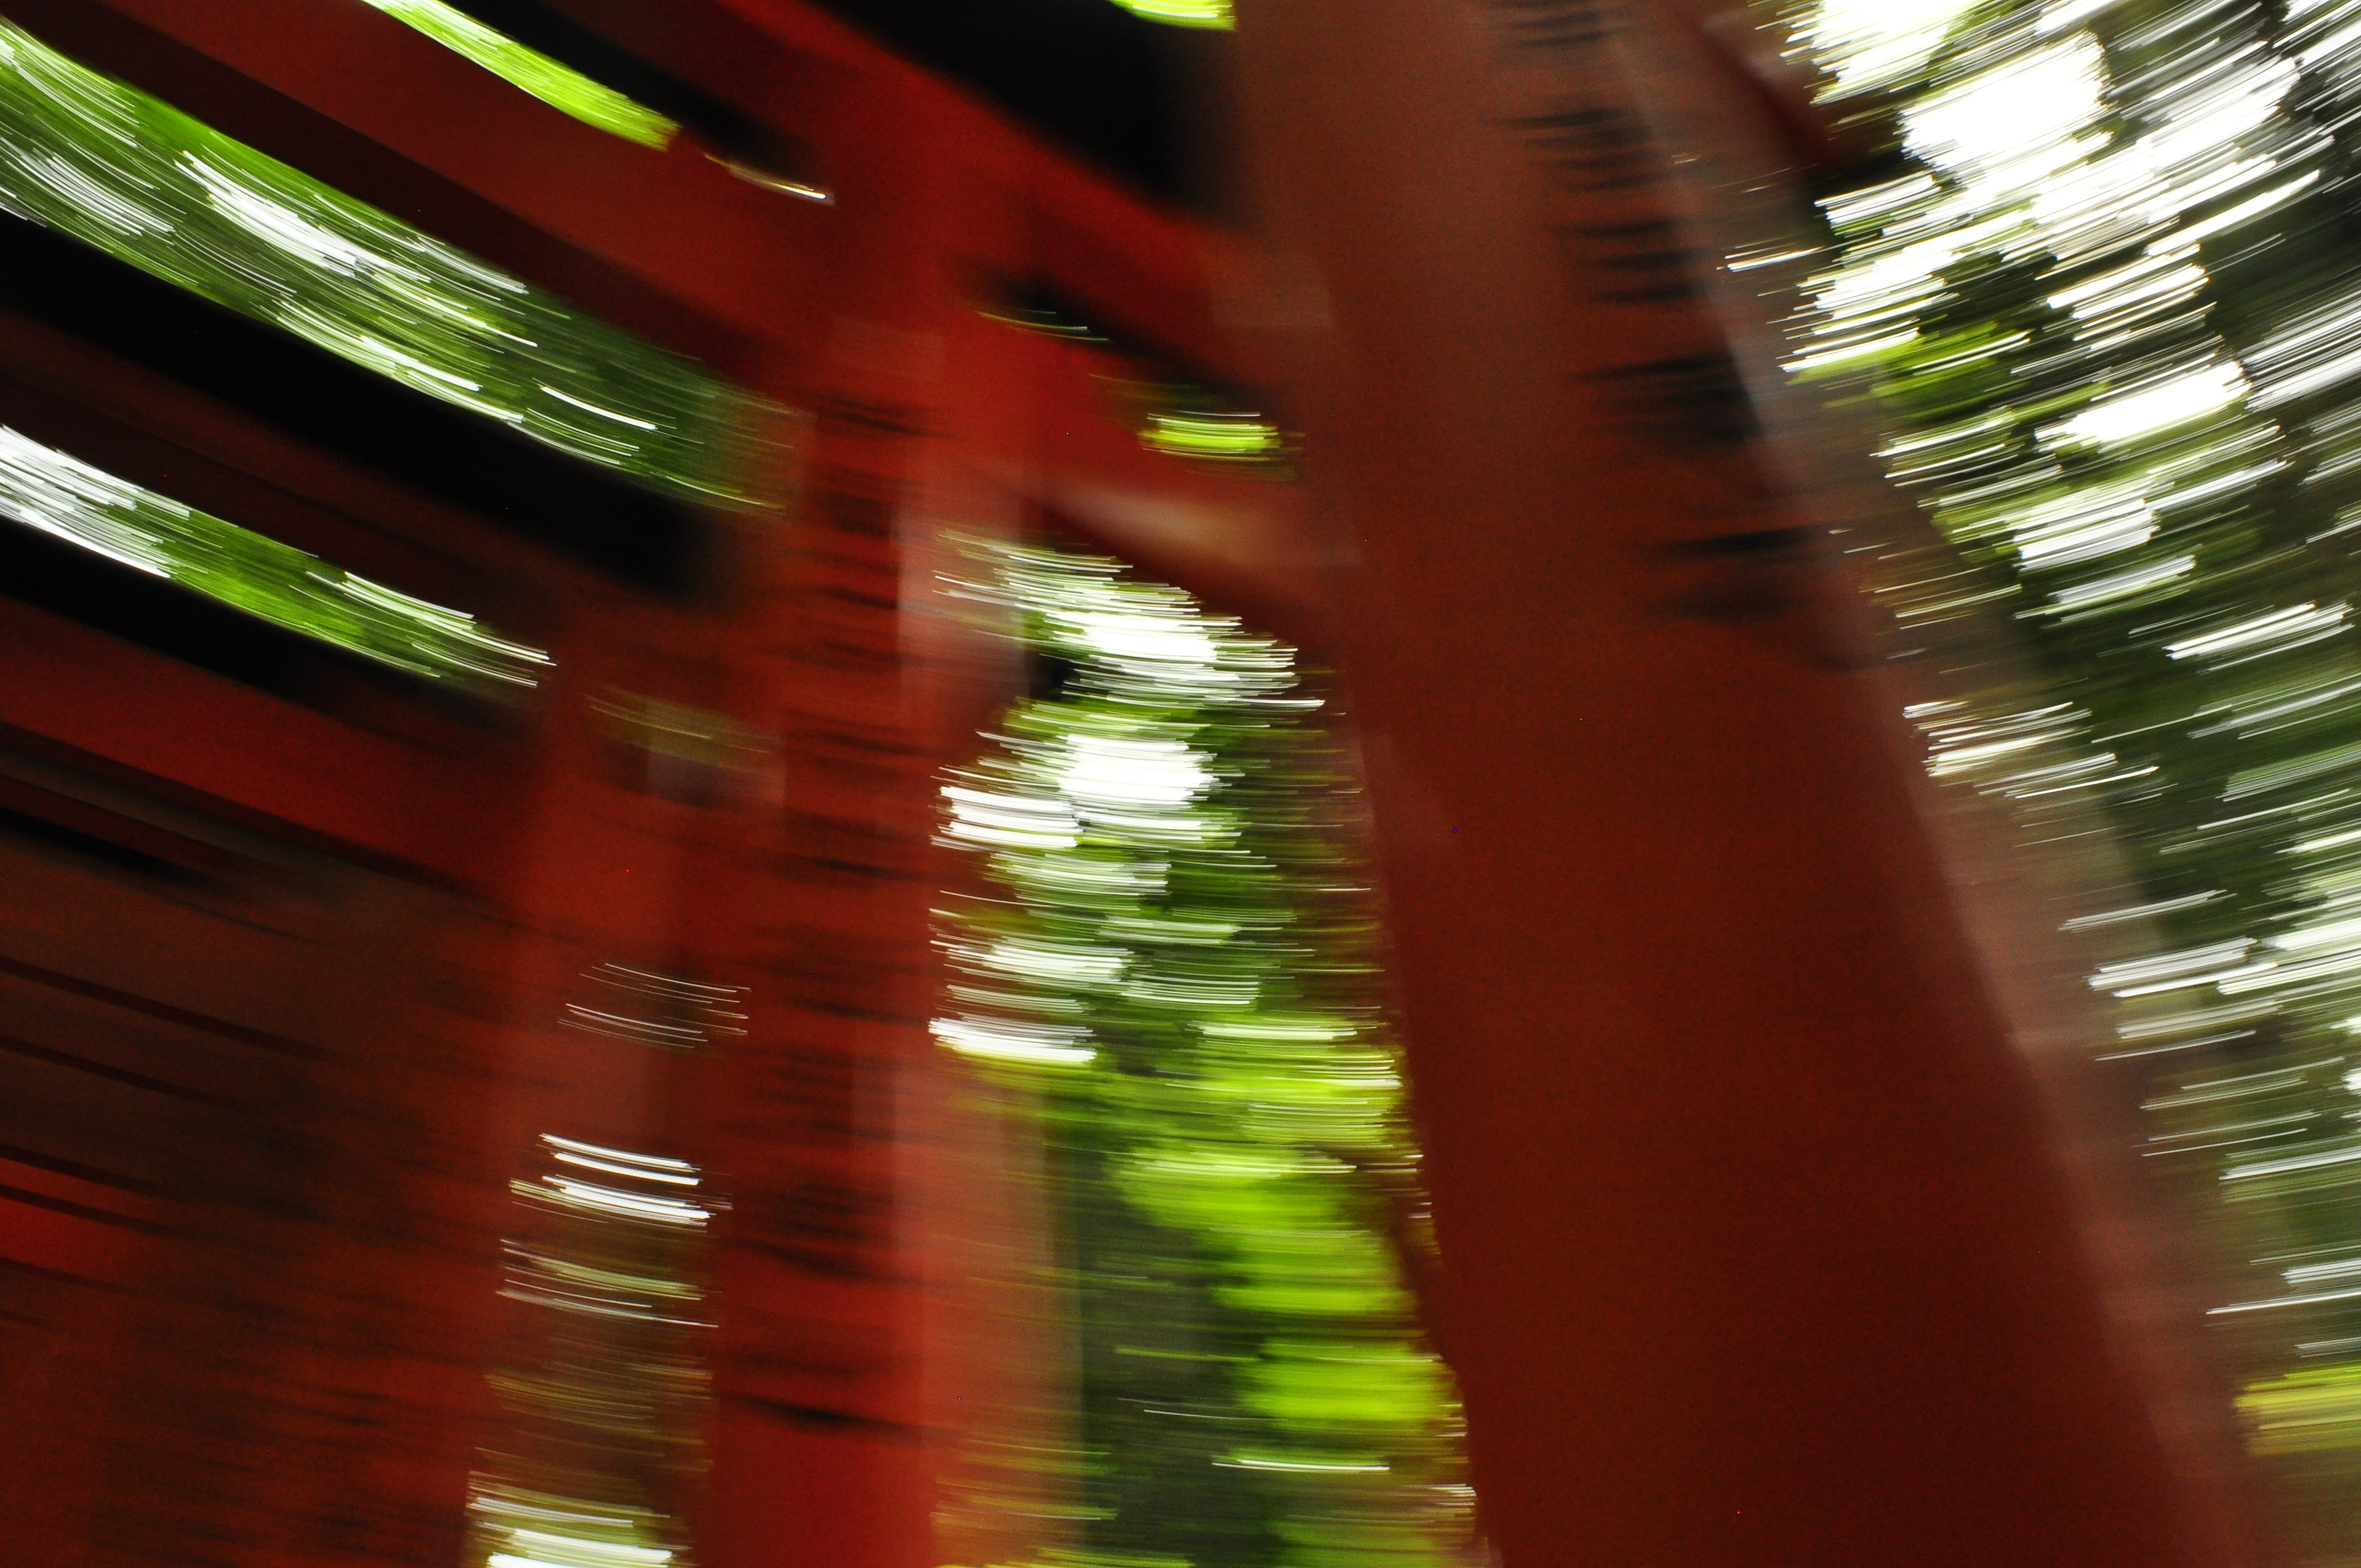 ABSTRACT IF A SHRINE IN KYOTO 3.5.jpg